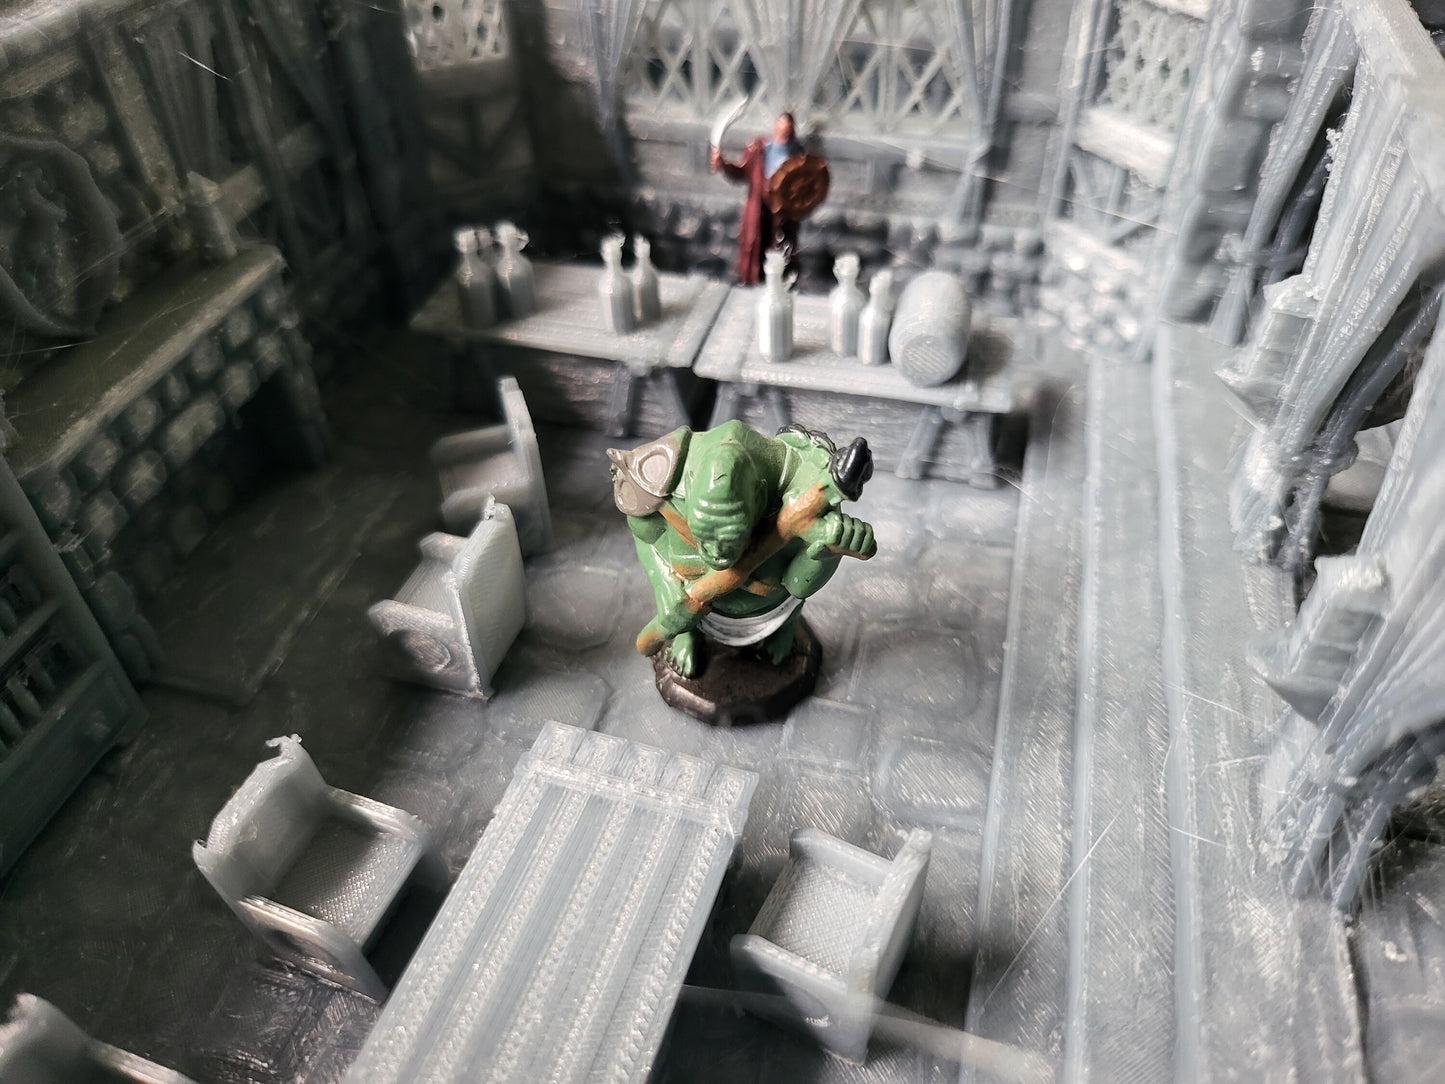 Noble House, Dungeons and Dragons, Tolkien, Fantasy, Fantasy Terrain, 28mm Terrain, Castle, Estate, Noble, Warhammer, Warhammer terrain, Manor, Great Hall, Dnd terrain, Adventure Terrain, Tabletop Gaming, Rpg, Role Playing, Tabletop Adventure